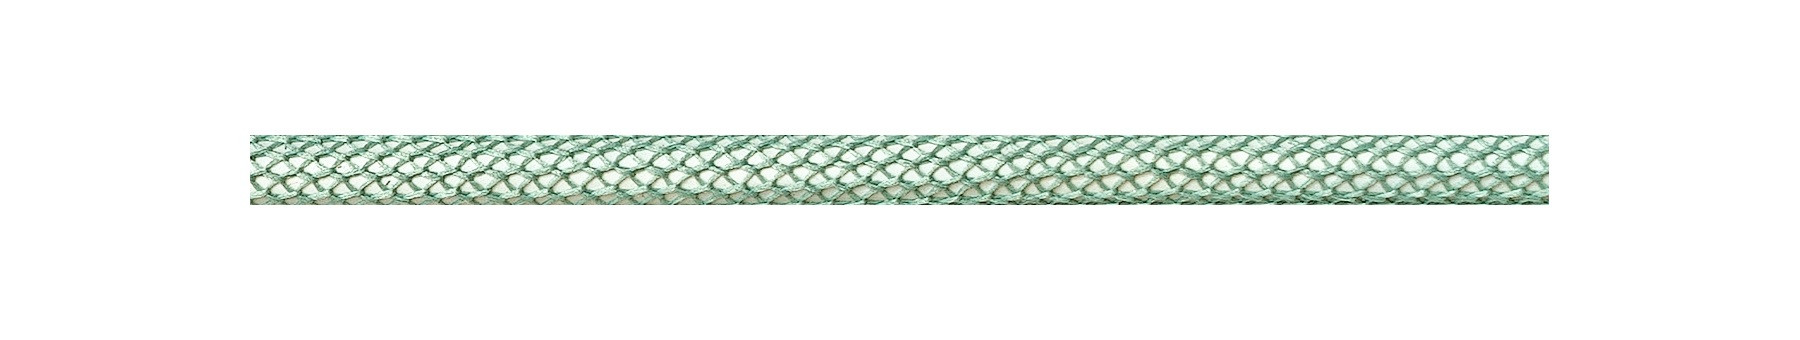 Textile Cable Pastel Green Netlike Textile Covering